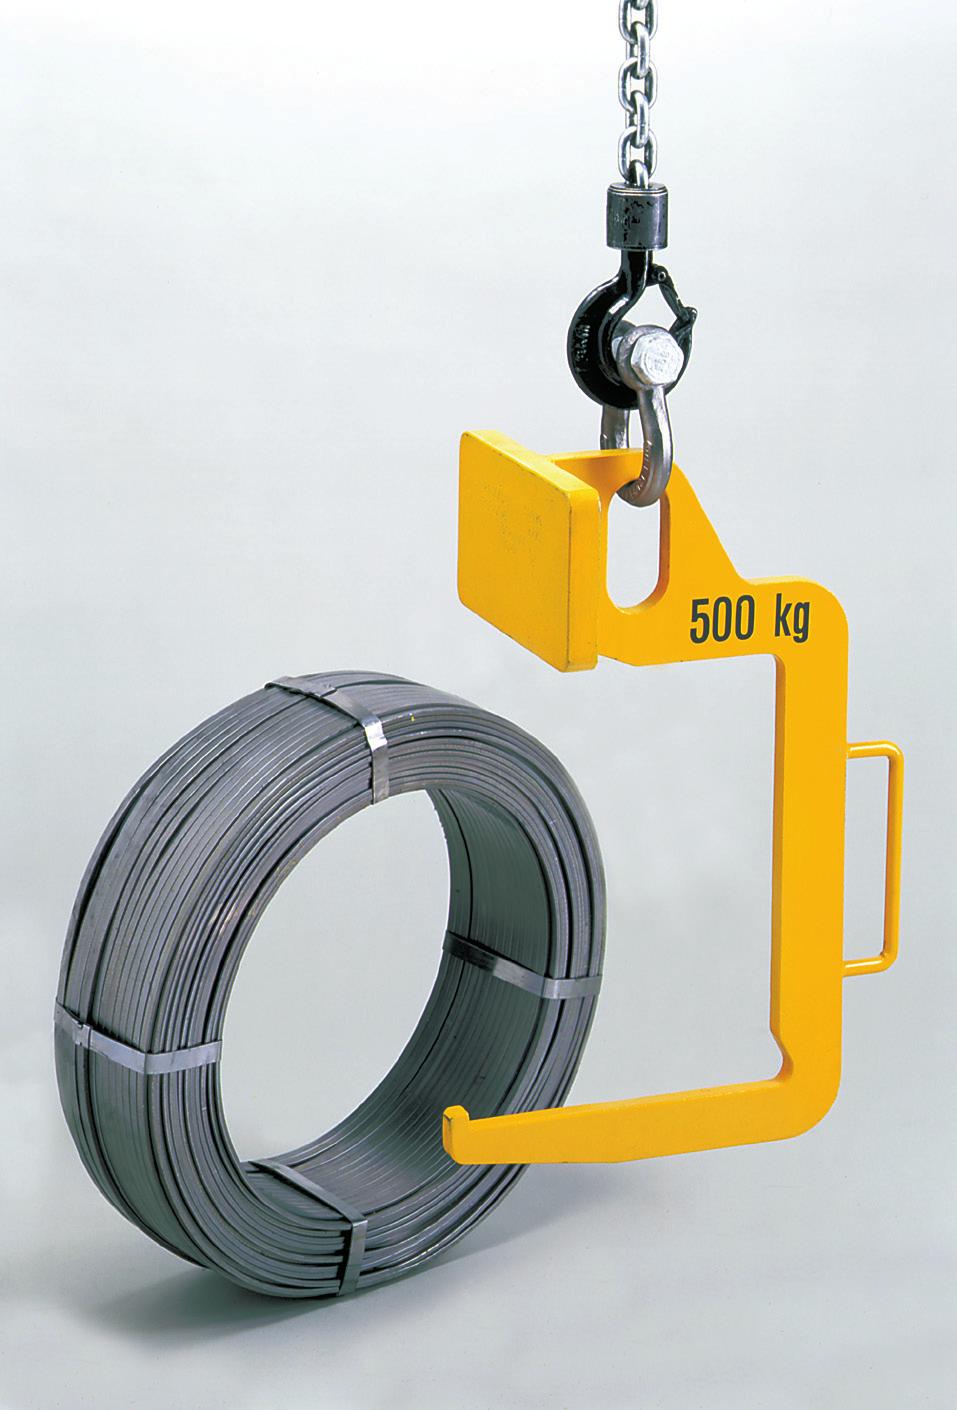 Tigrip Load Hoisting Tackle C-Hooks C-Hook model Capacity 500-10000 Coils, rolls, rings and similar items are transported safely with the Tigrip C-Hooks.